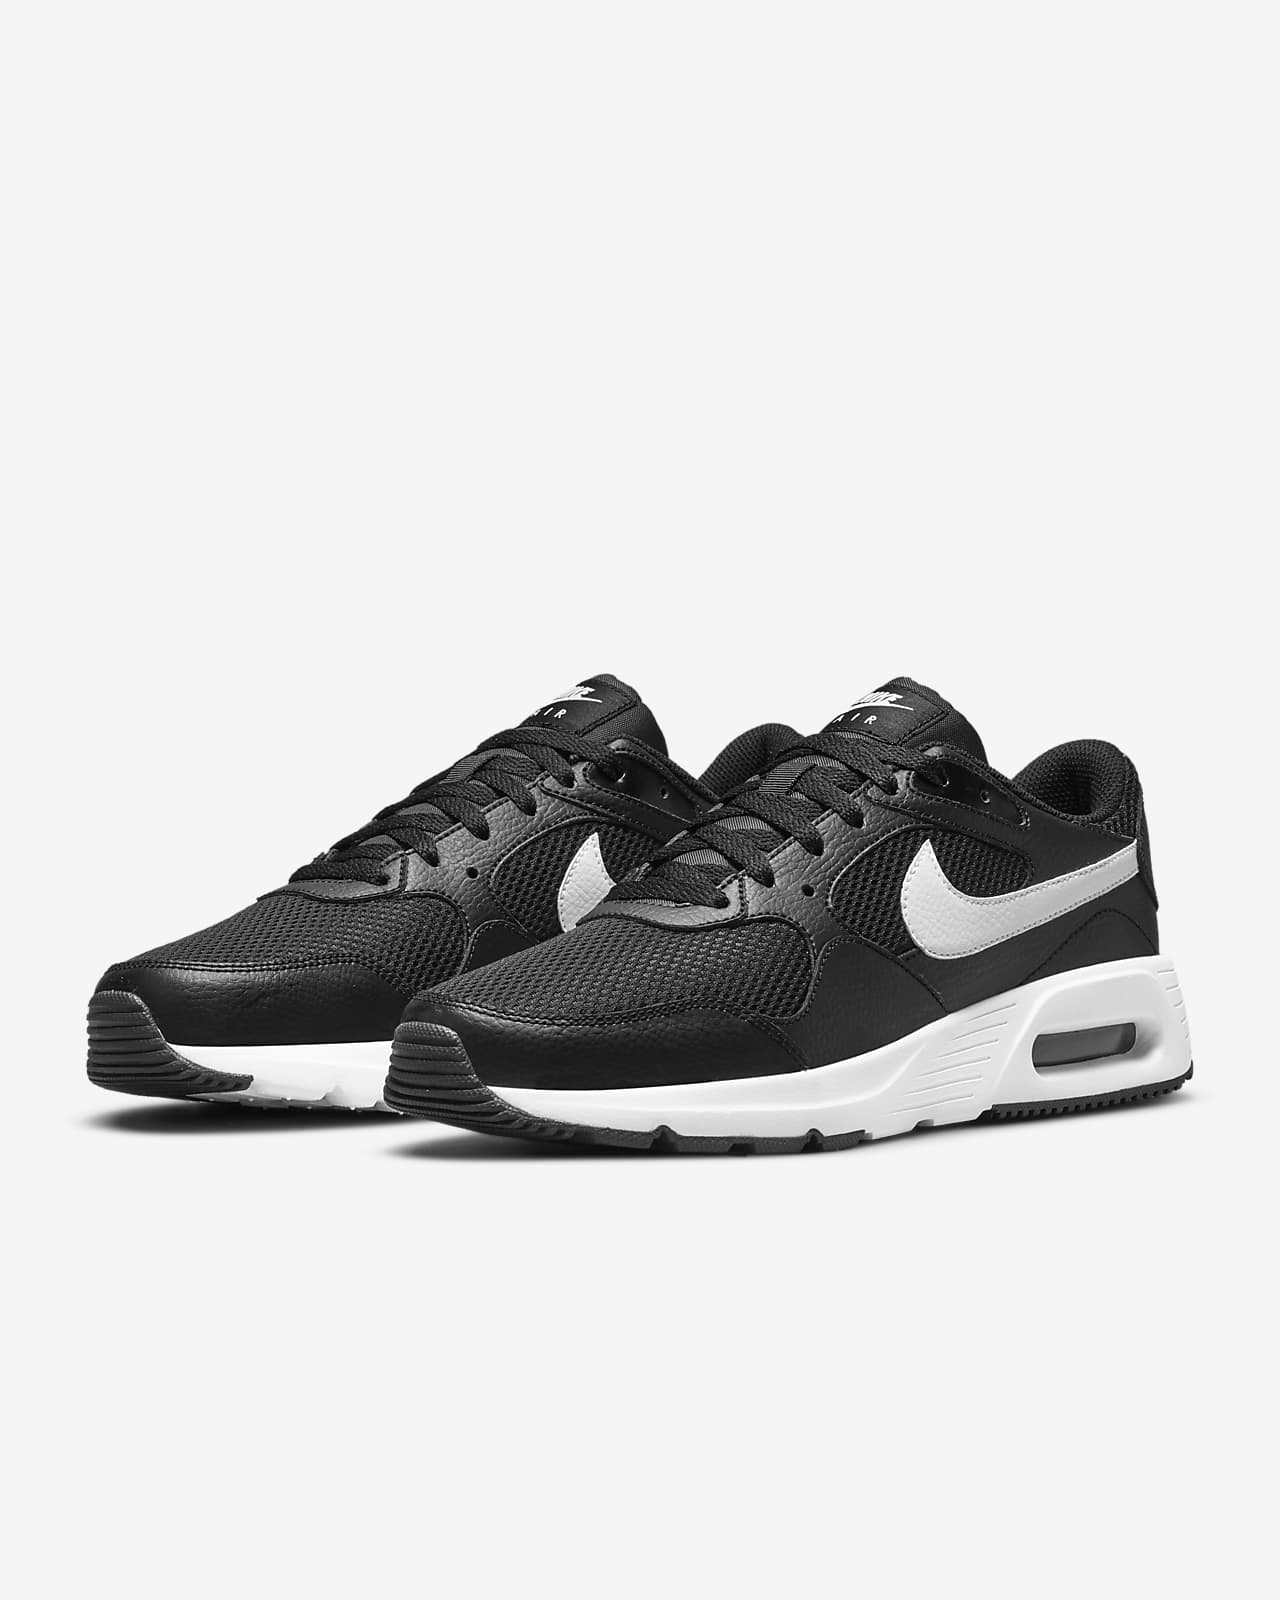 size 8 men's nike air max shoes